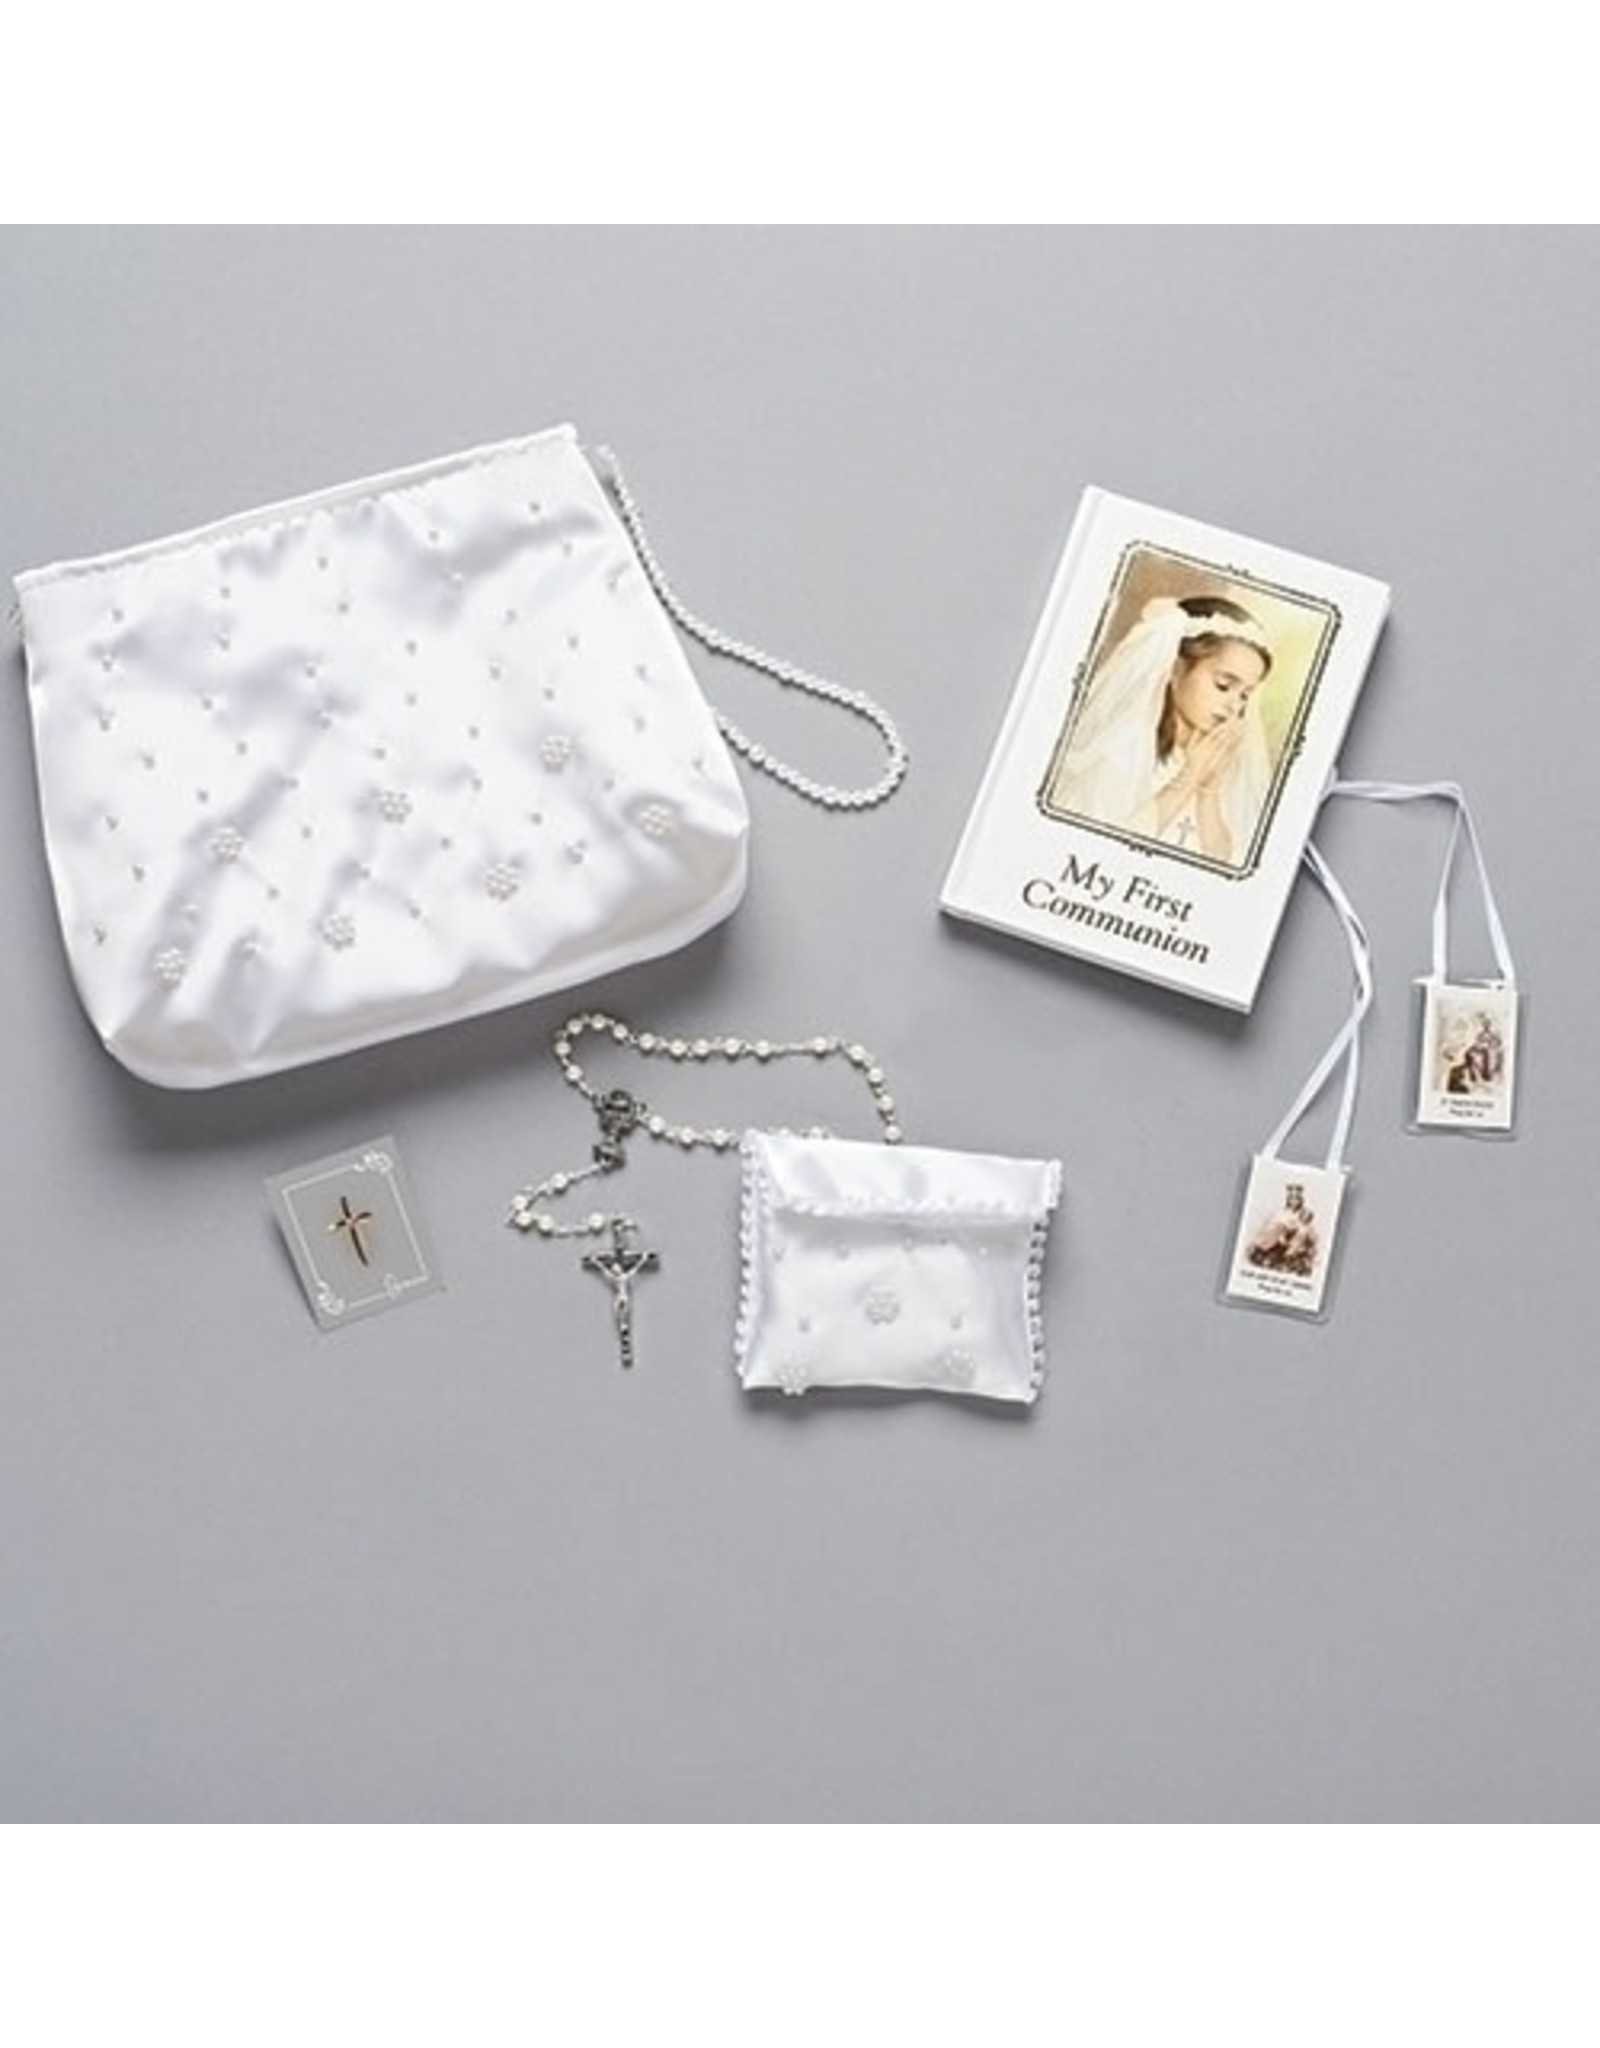 First Communion Purse Set (Rosary, Rosary, Pouch, Book, Pin